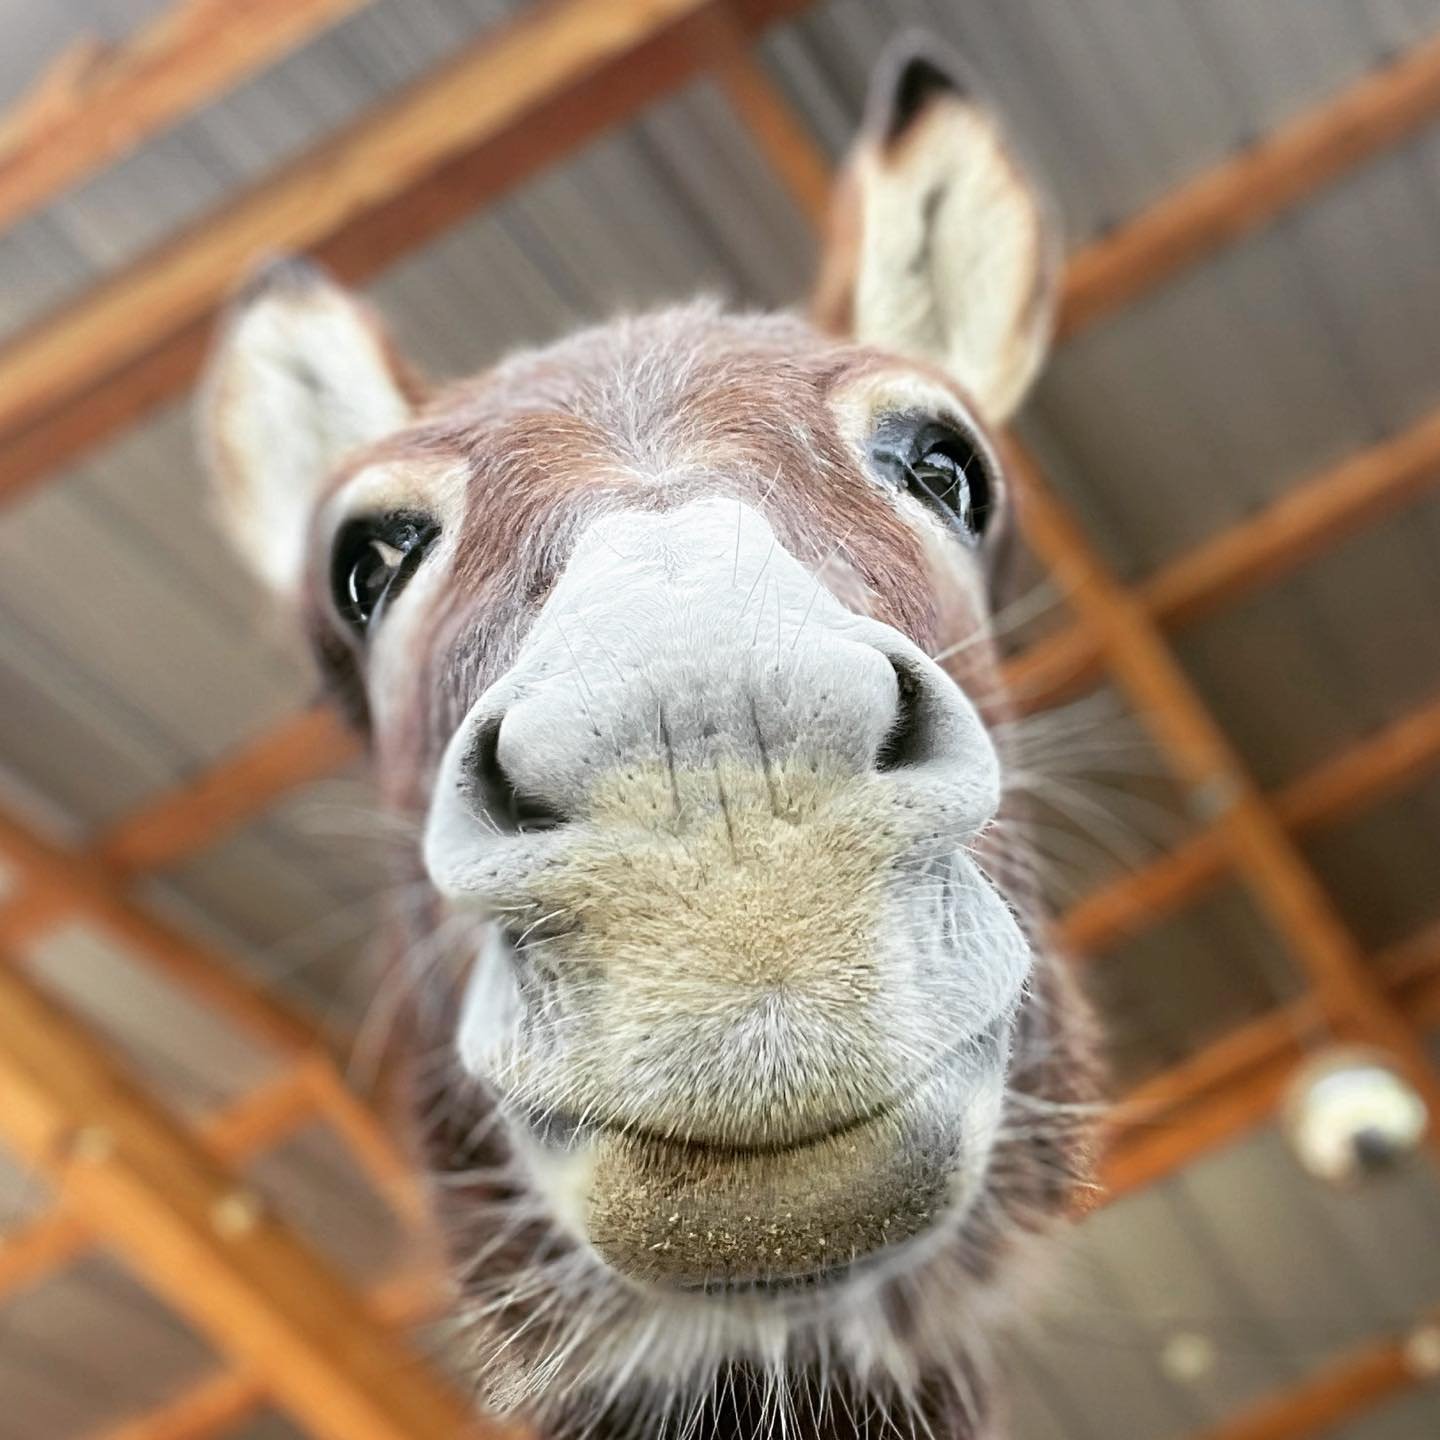 Yo yo yo it&rsquo;s your girl Walnut comin&rsquo; at ya on National Donkey Day! Every day is donkey day for me and I can promise you life in the barnyard has been rad and I&rsquo;m just as sassy as ever! Looking forward to kickin&rsquo; it with y&rsq